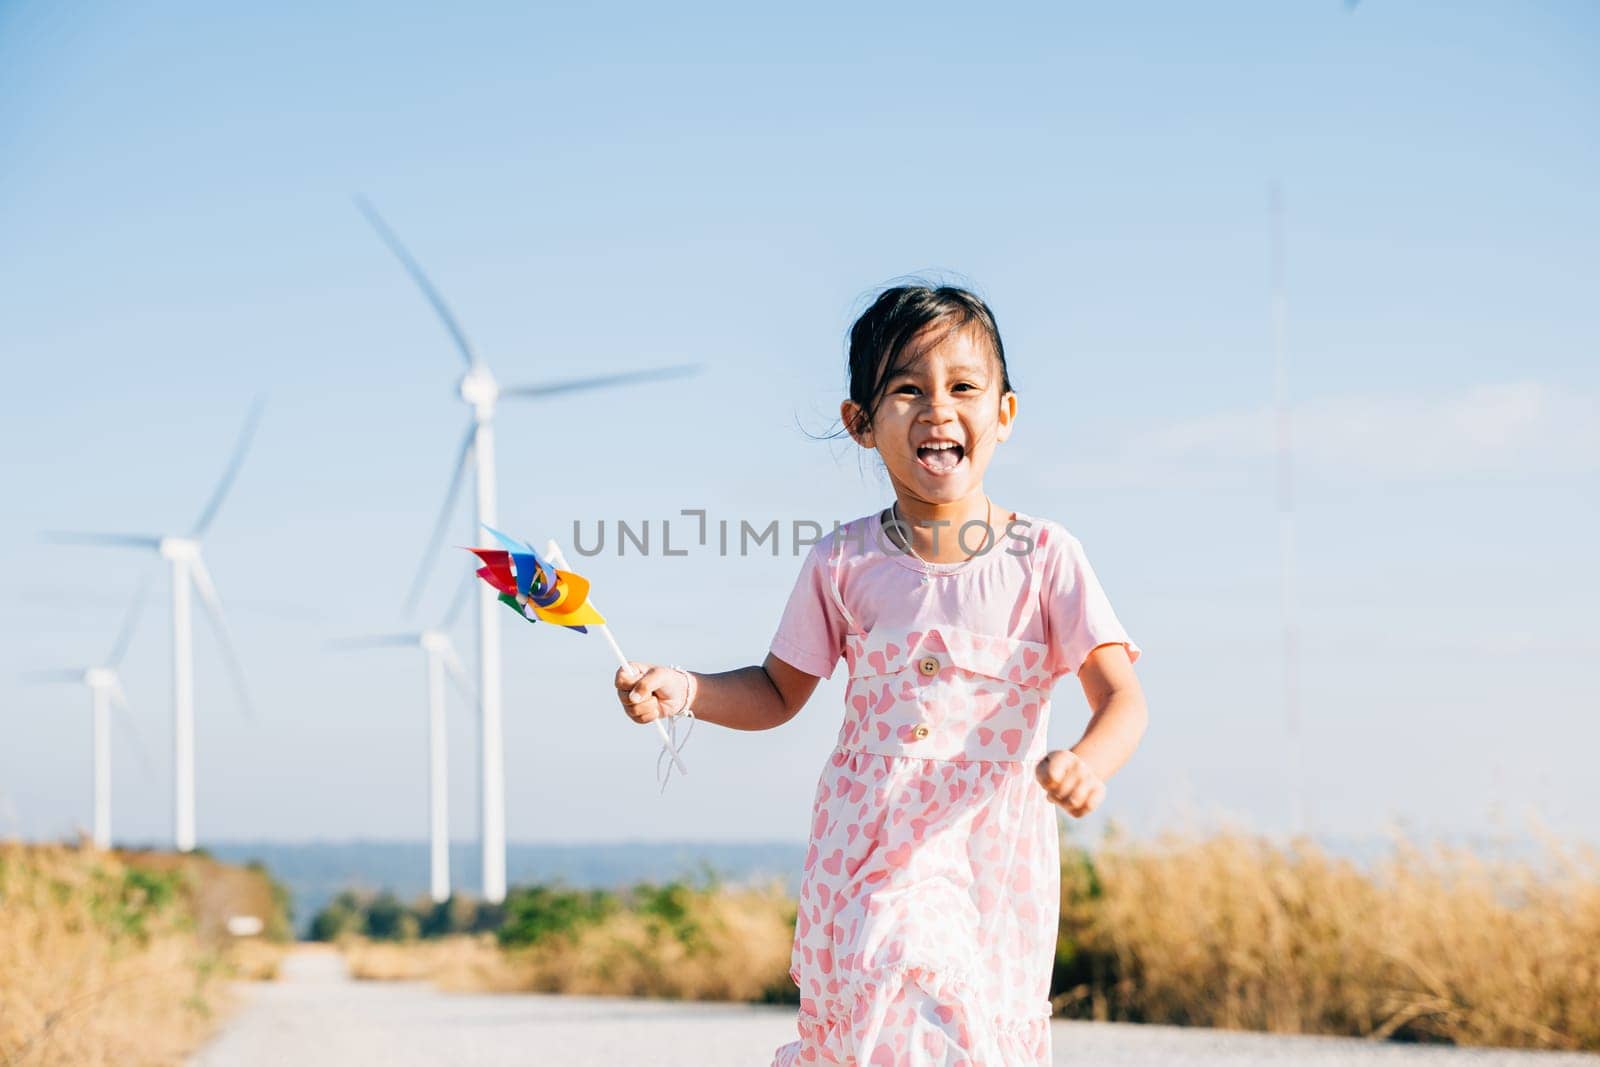 A joyful child holding pinwheels runs near windmills embodying wind energy education. Clean electricity and sustainable industry visuals in a picturesque wind turbine landscape.